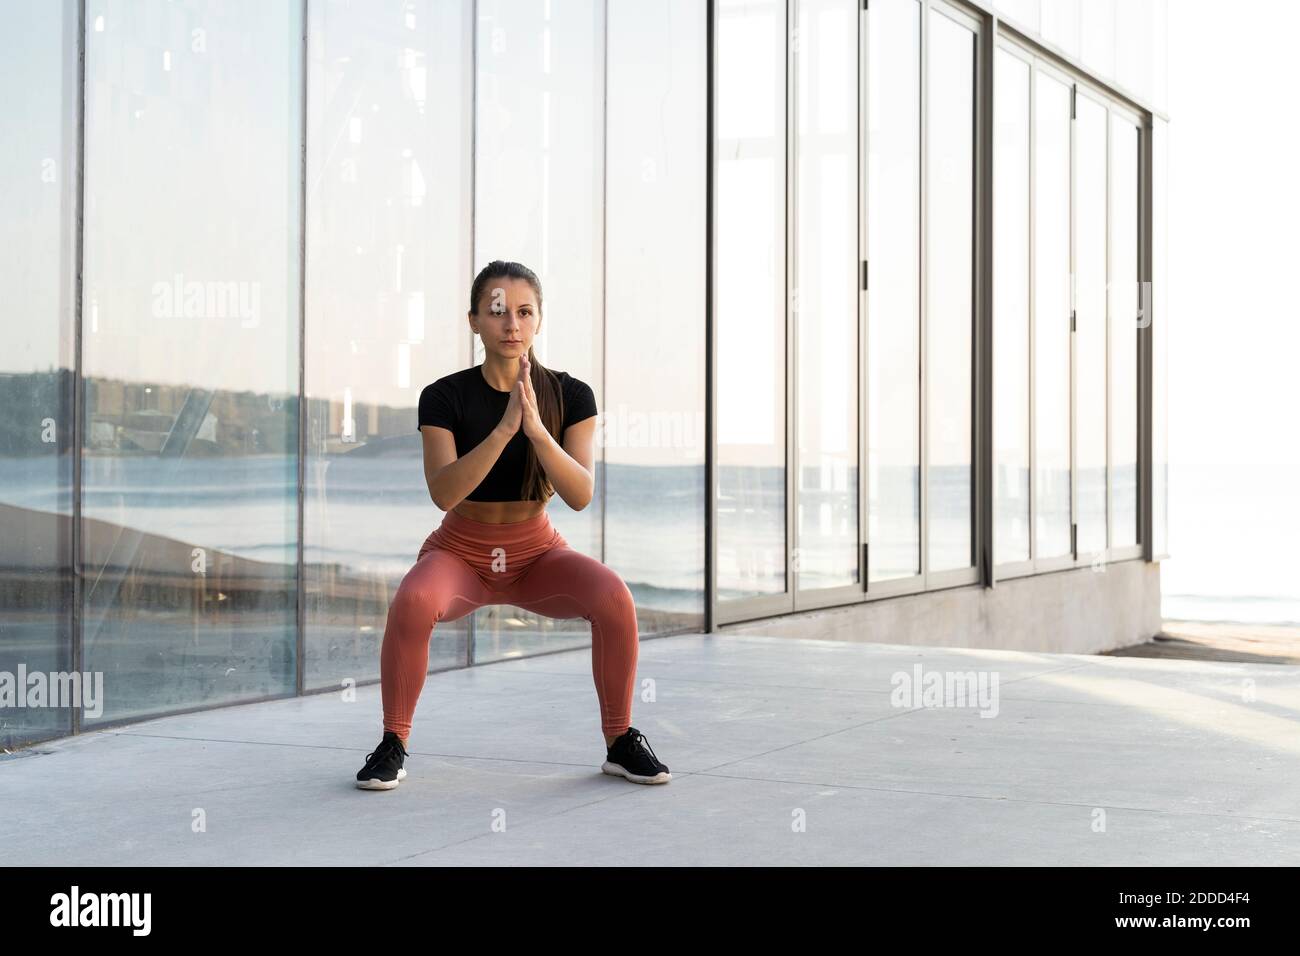 Young sportswoman doing squat exercise on promenade against glass window Stock Photo